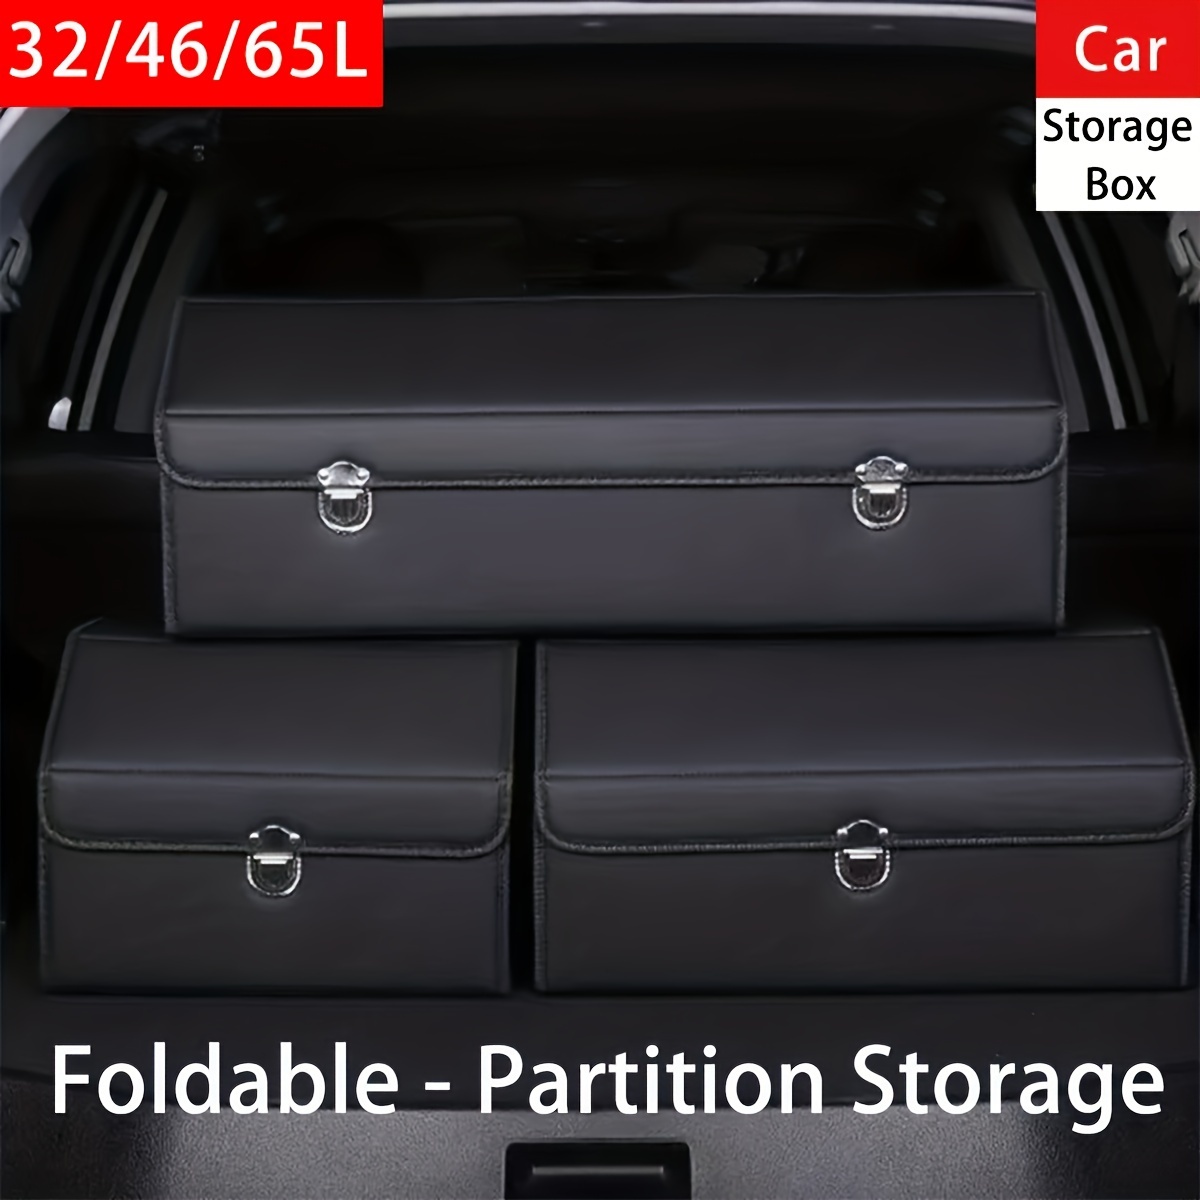 

Car Trunk Storage Box Leather Material - Suitable For Cars, Homes, Travel, Camping And Picnics, Foldable Adjustable Multi-functional Storage, Car Interior Supplies